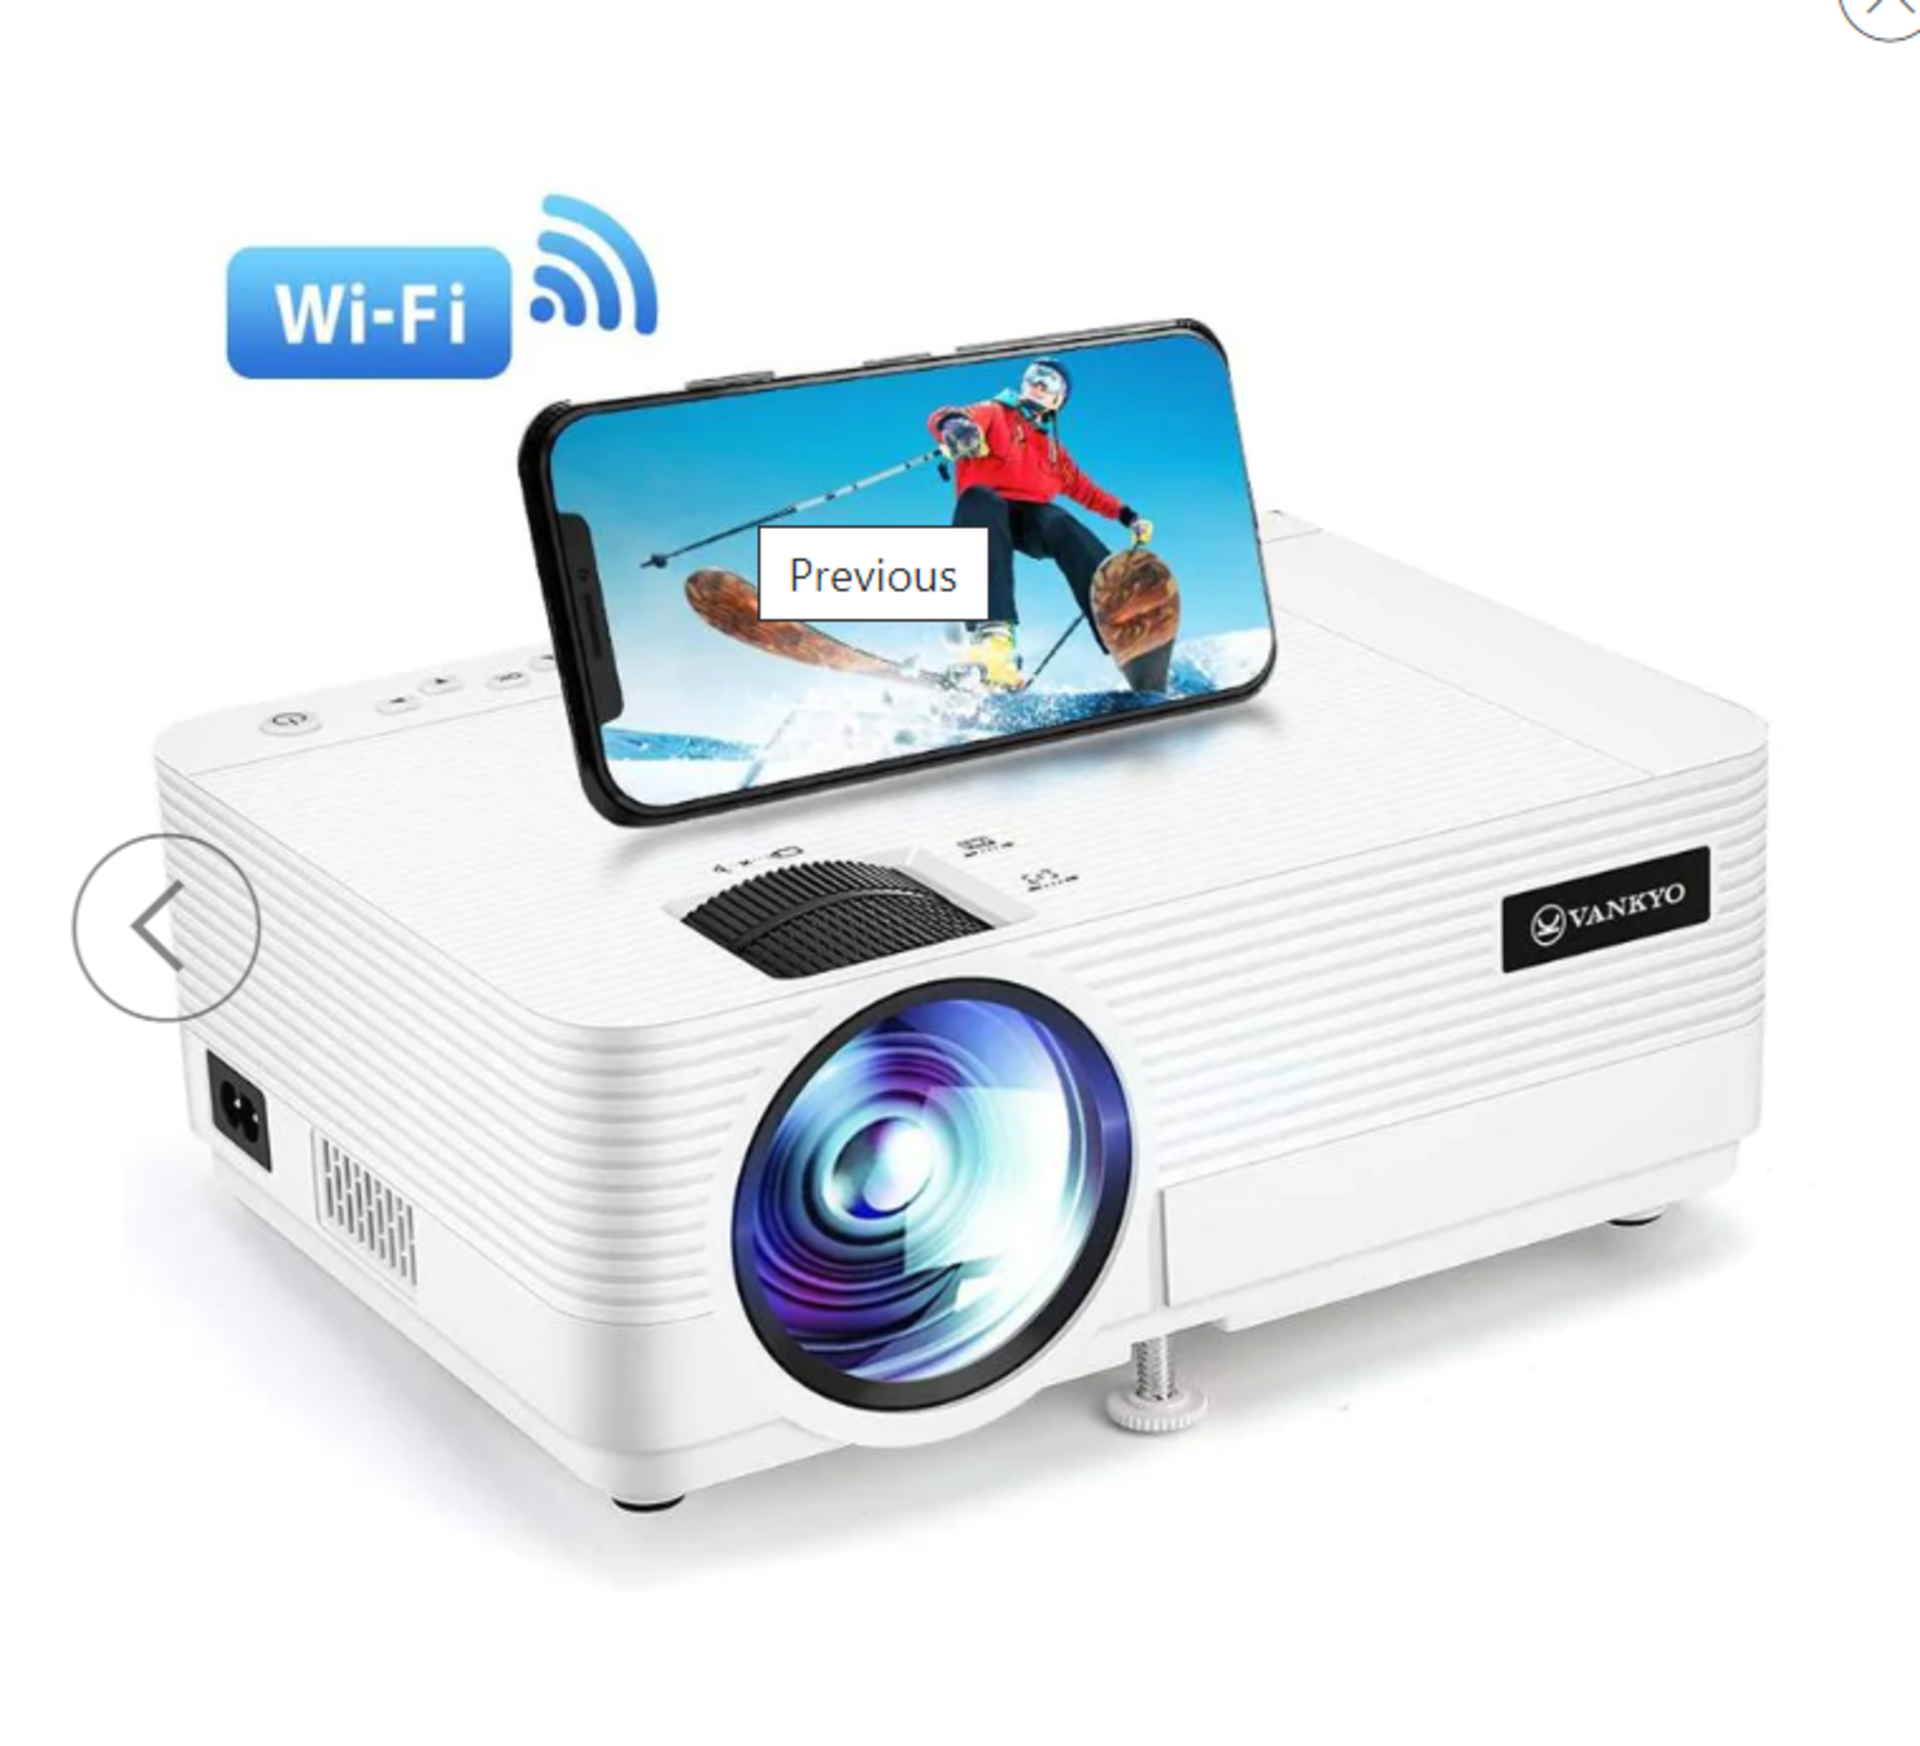 New Boxed VANKYO Leisure 470 Mini Phone Projector for Home and Sewing, Native 720P Full HD, Max